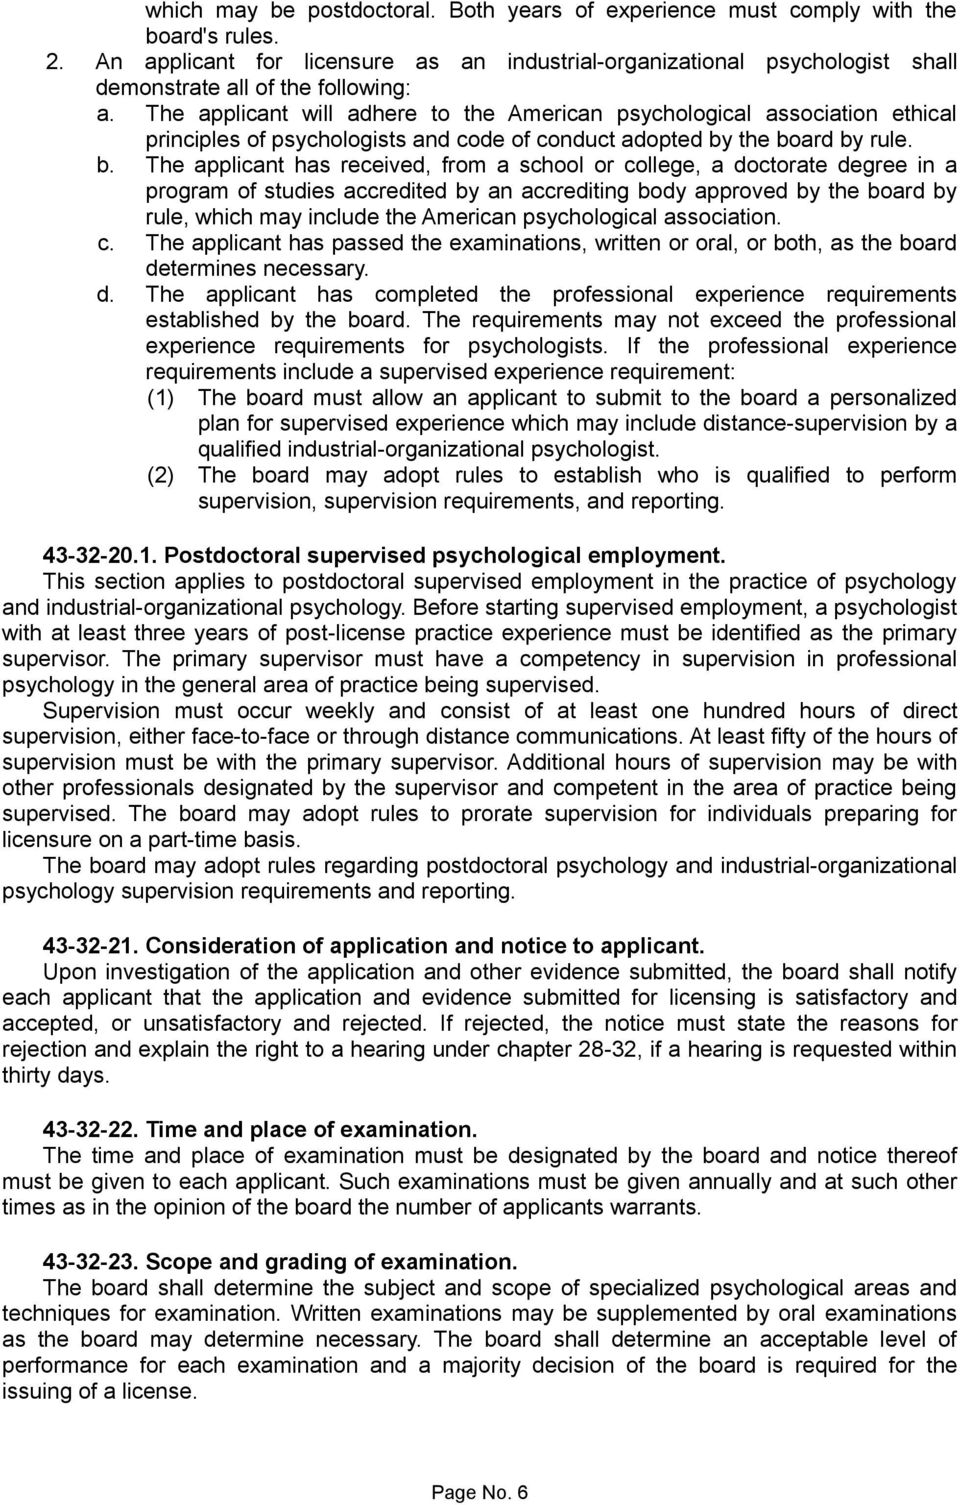 The applicant will adhere to the American psychological association ethical principles of psychologists and code of conduct adopted by